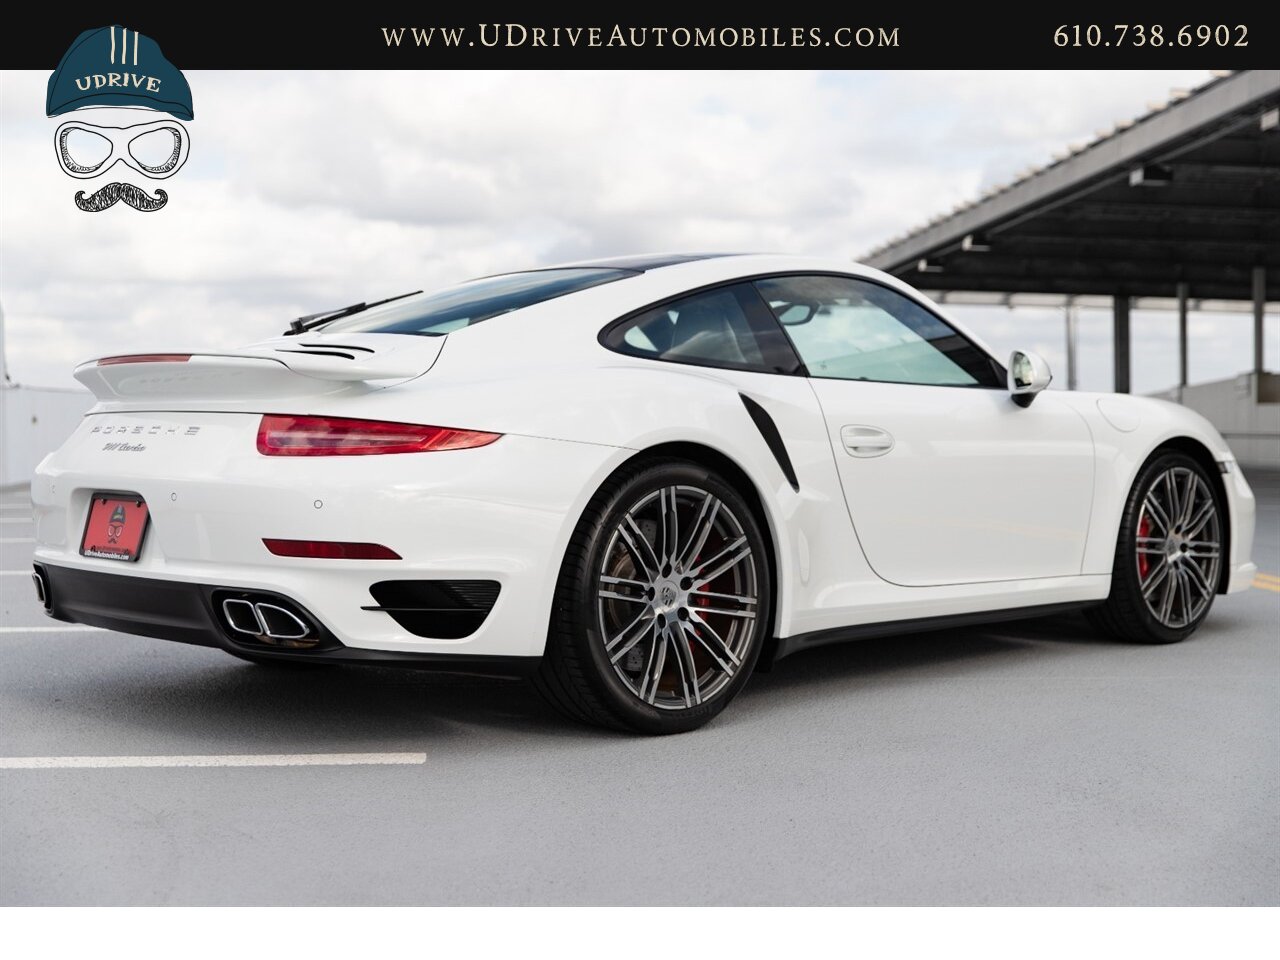 2014 Porsche 911 Turbo 12k Miles White over Black Chrono Rear Wiper  Sport Seats 20in Turbo Whls Sunroof Red Belts - Photo 3 - West Chester, PA 19382